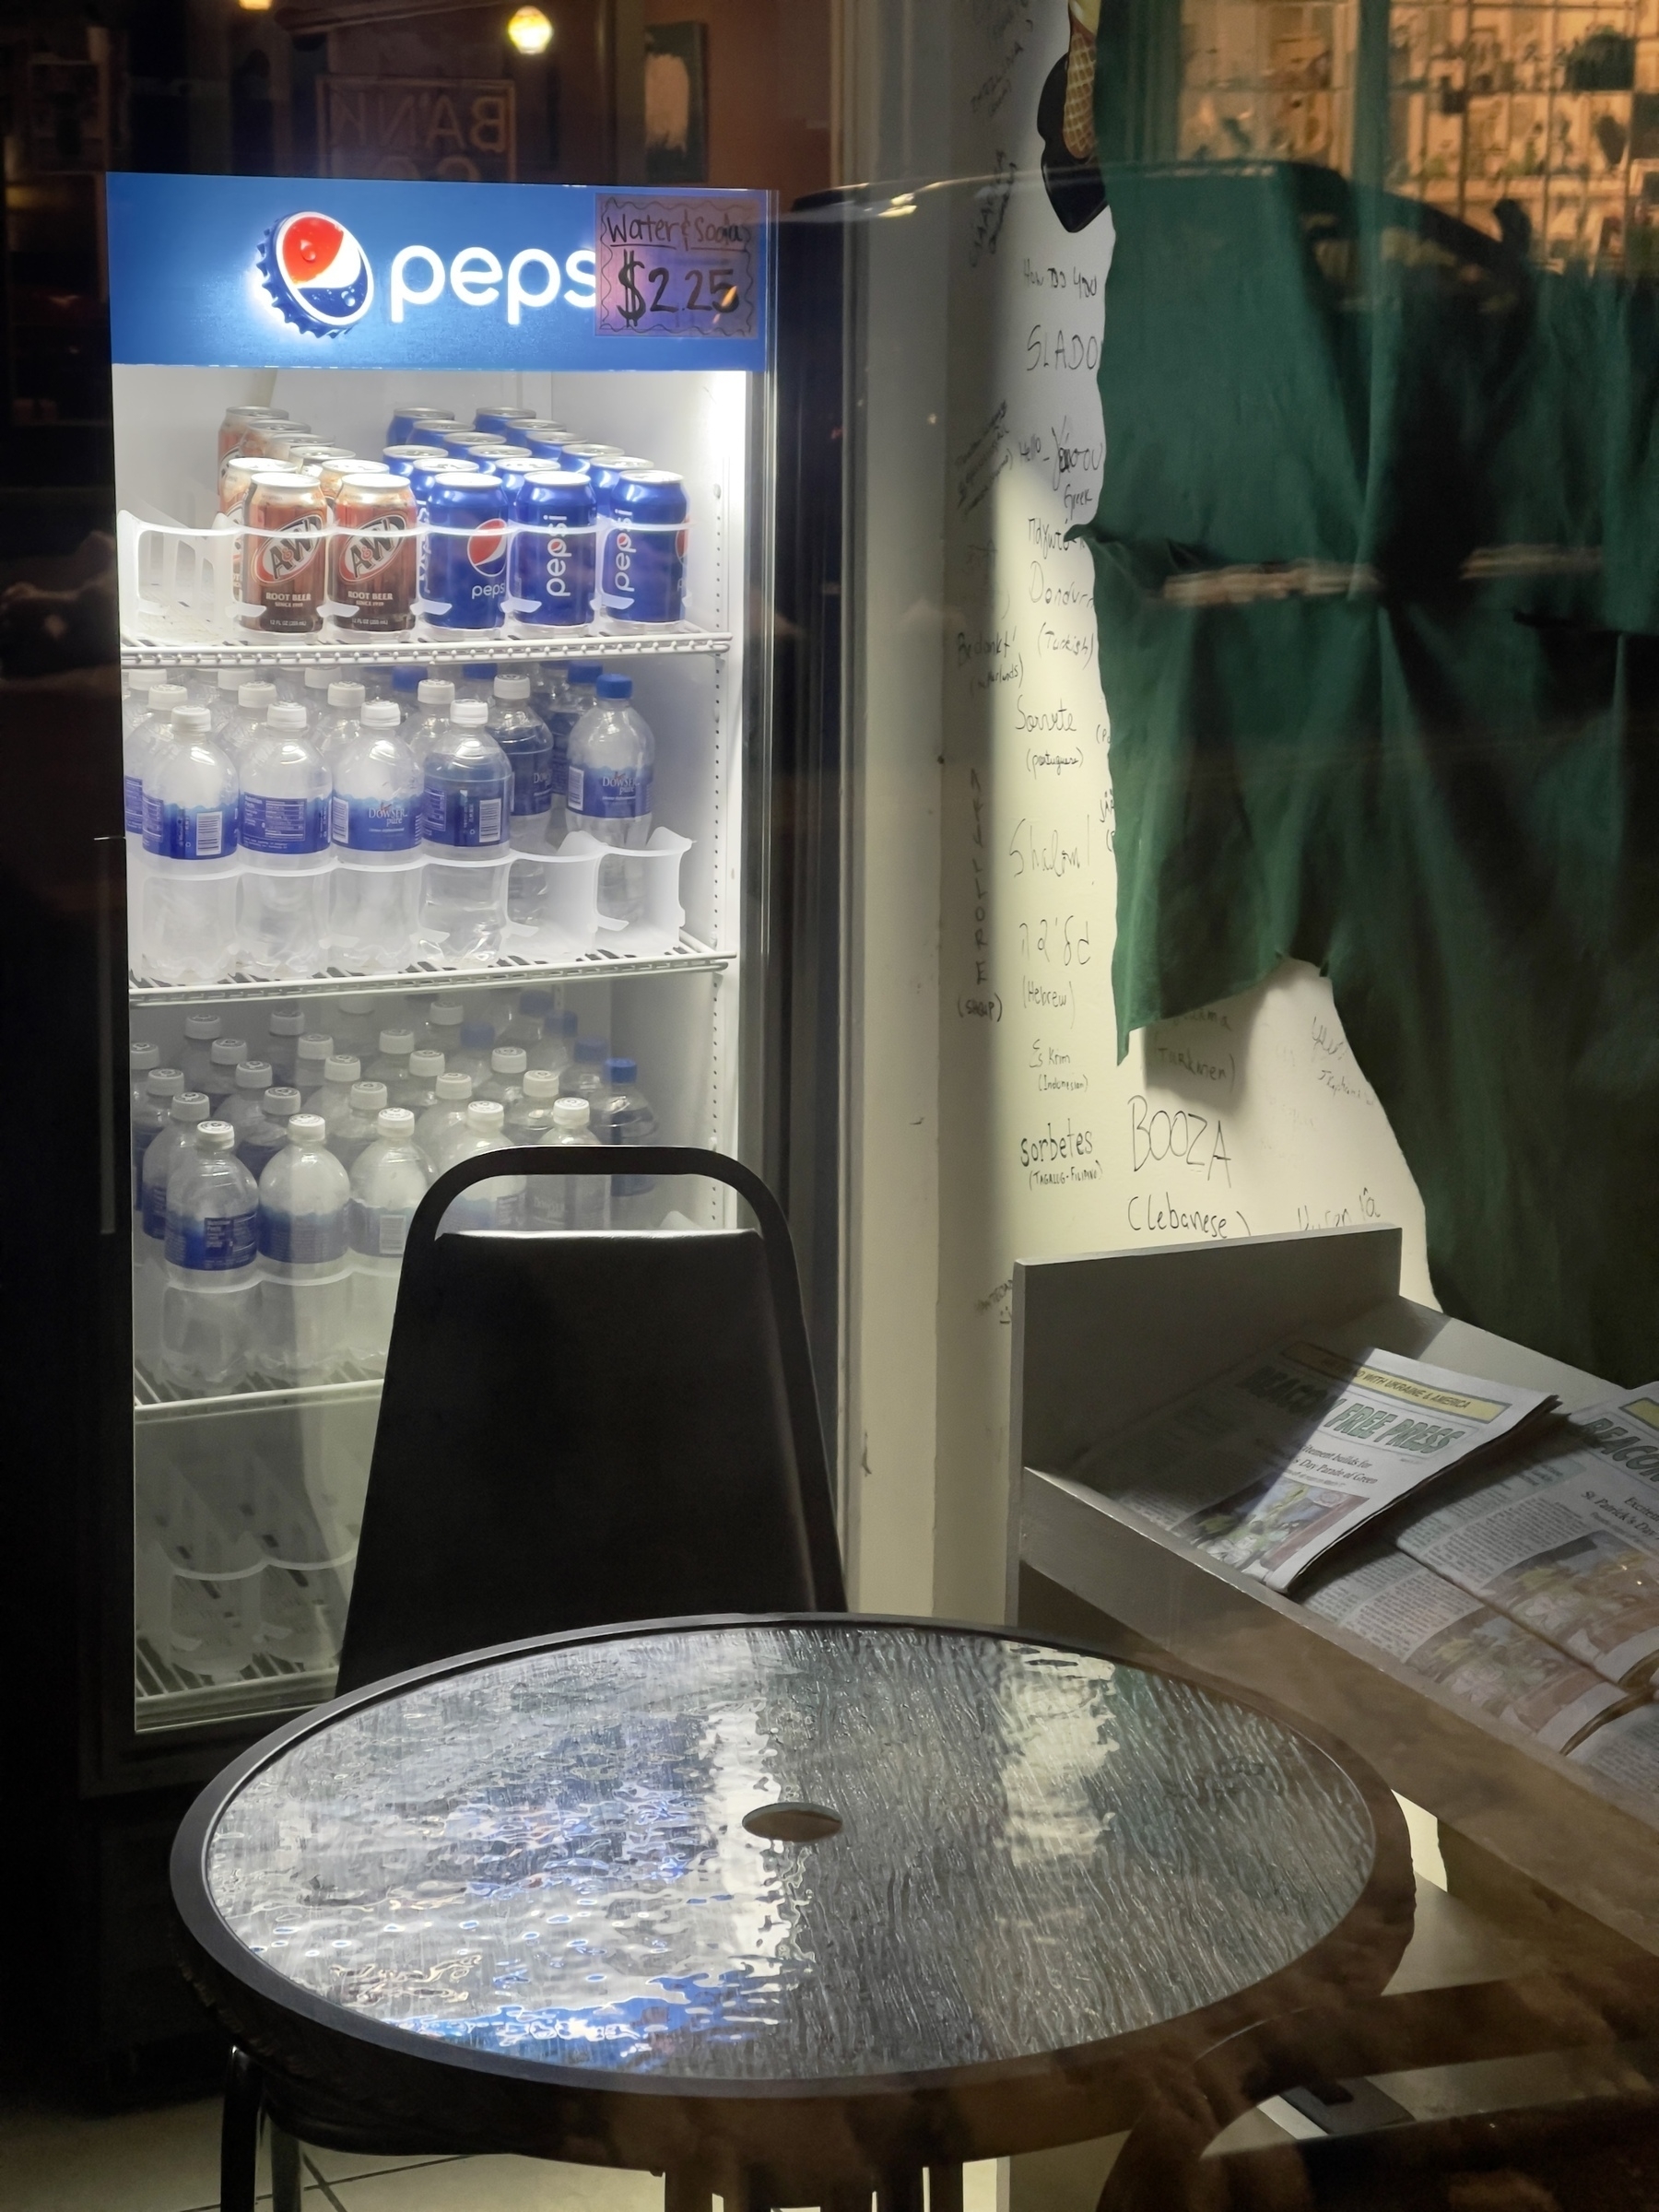 Pepsi refrigerator with table and chair in front of it in a darkened shop.